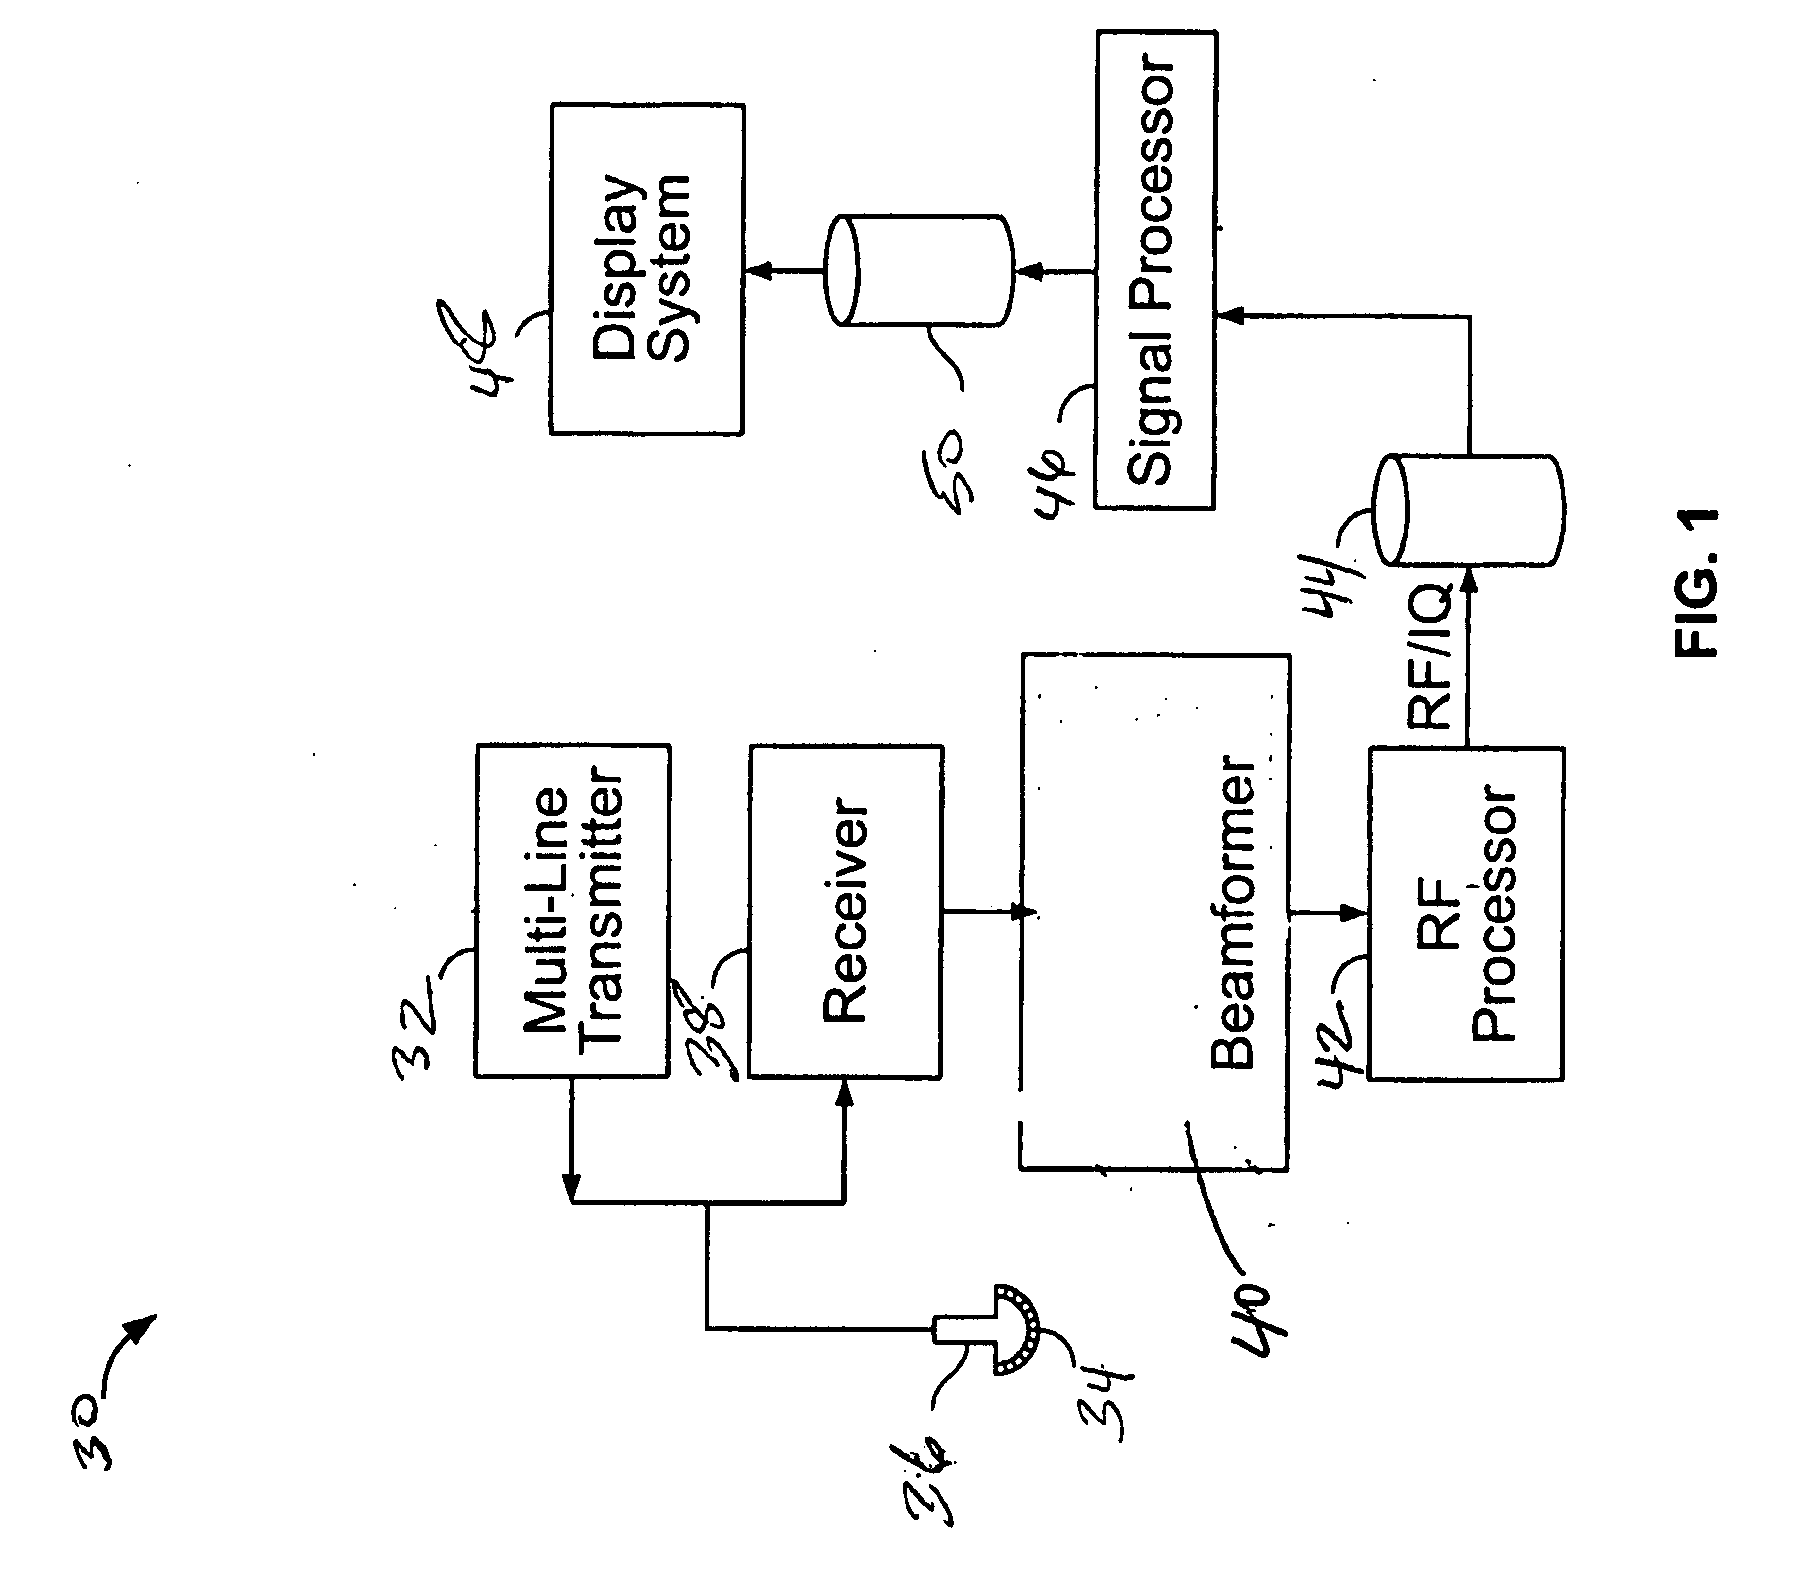 Methods and systems for spatial compounding in a handheld ultrasound device